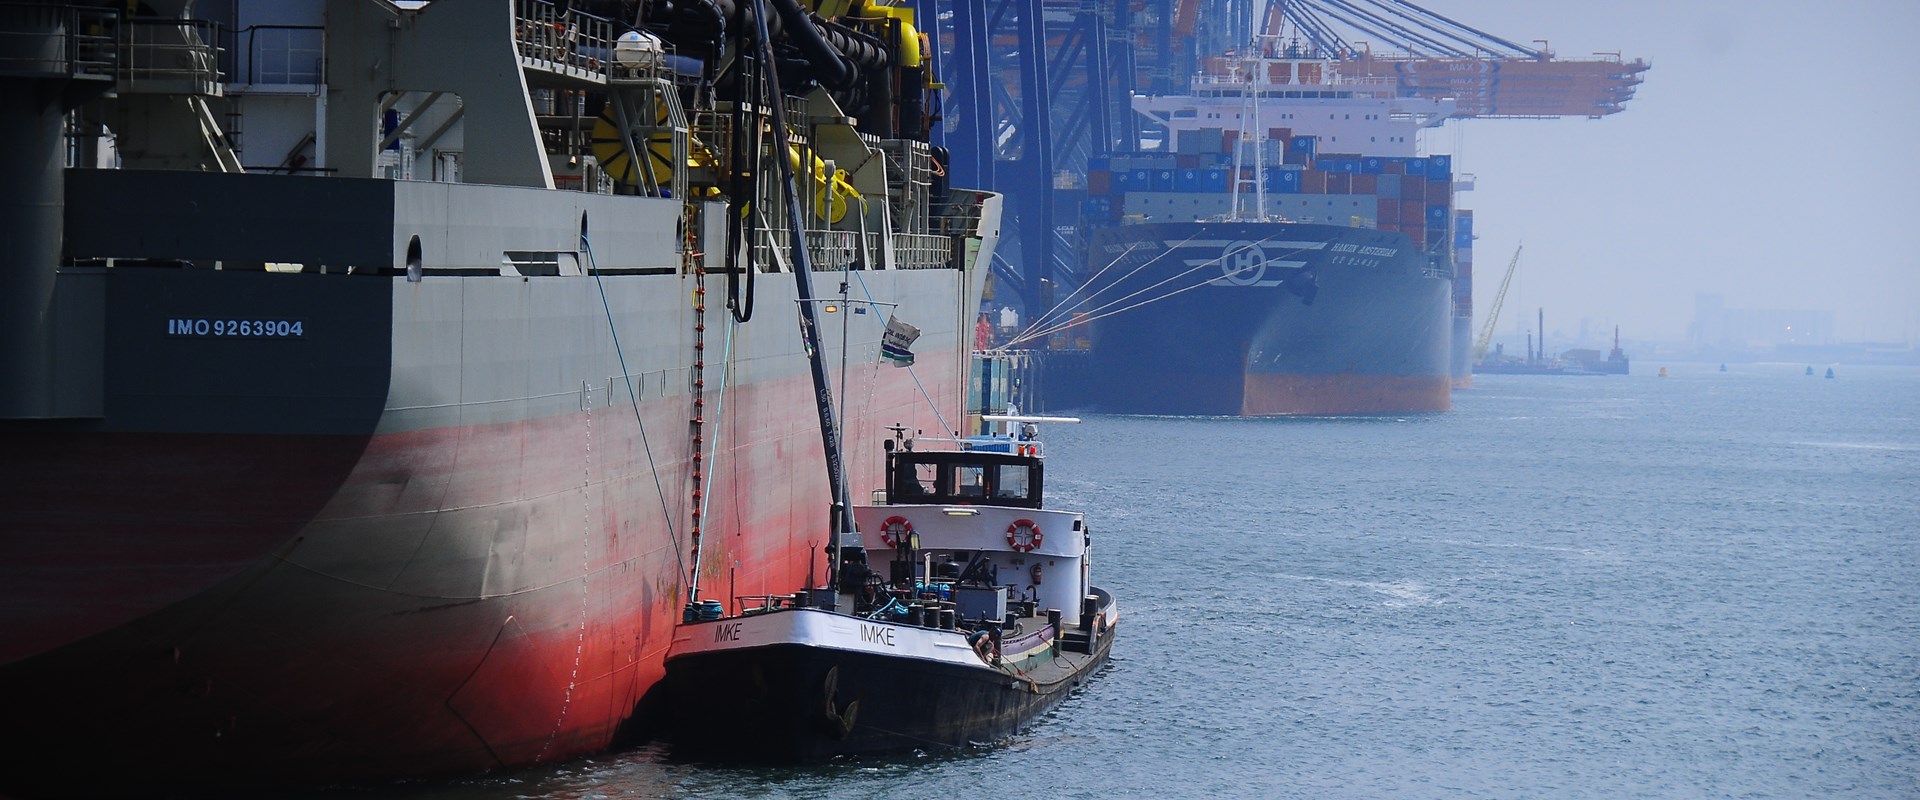 A tug boat alongside a larger vessel in a harbour